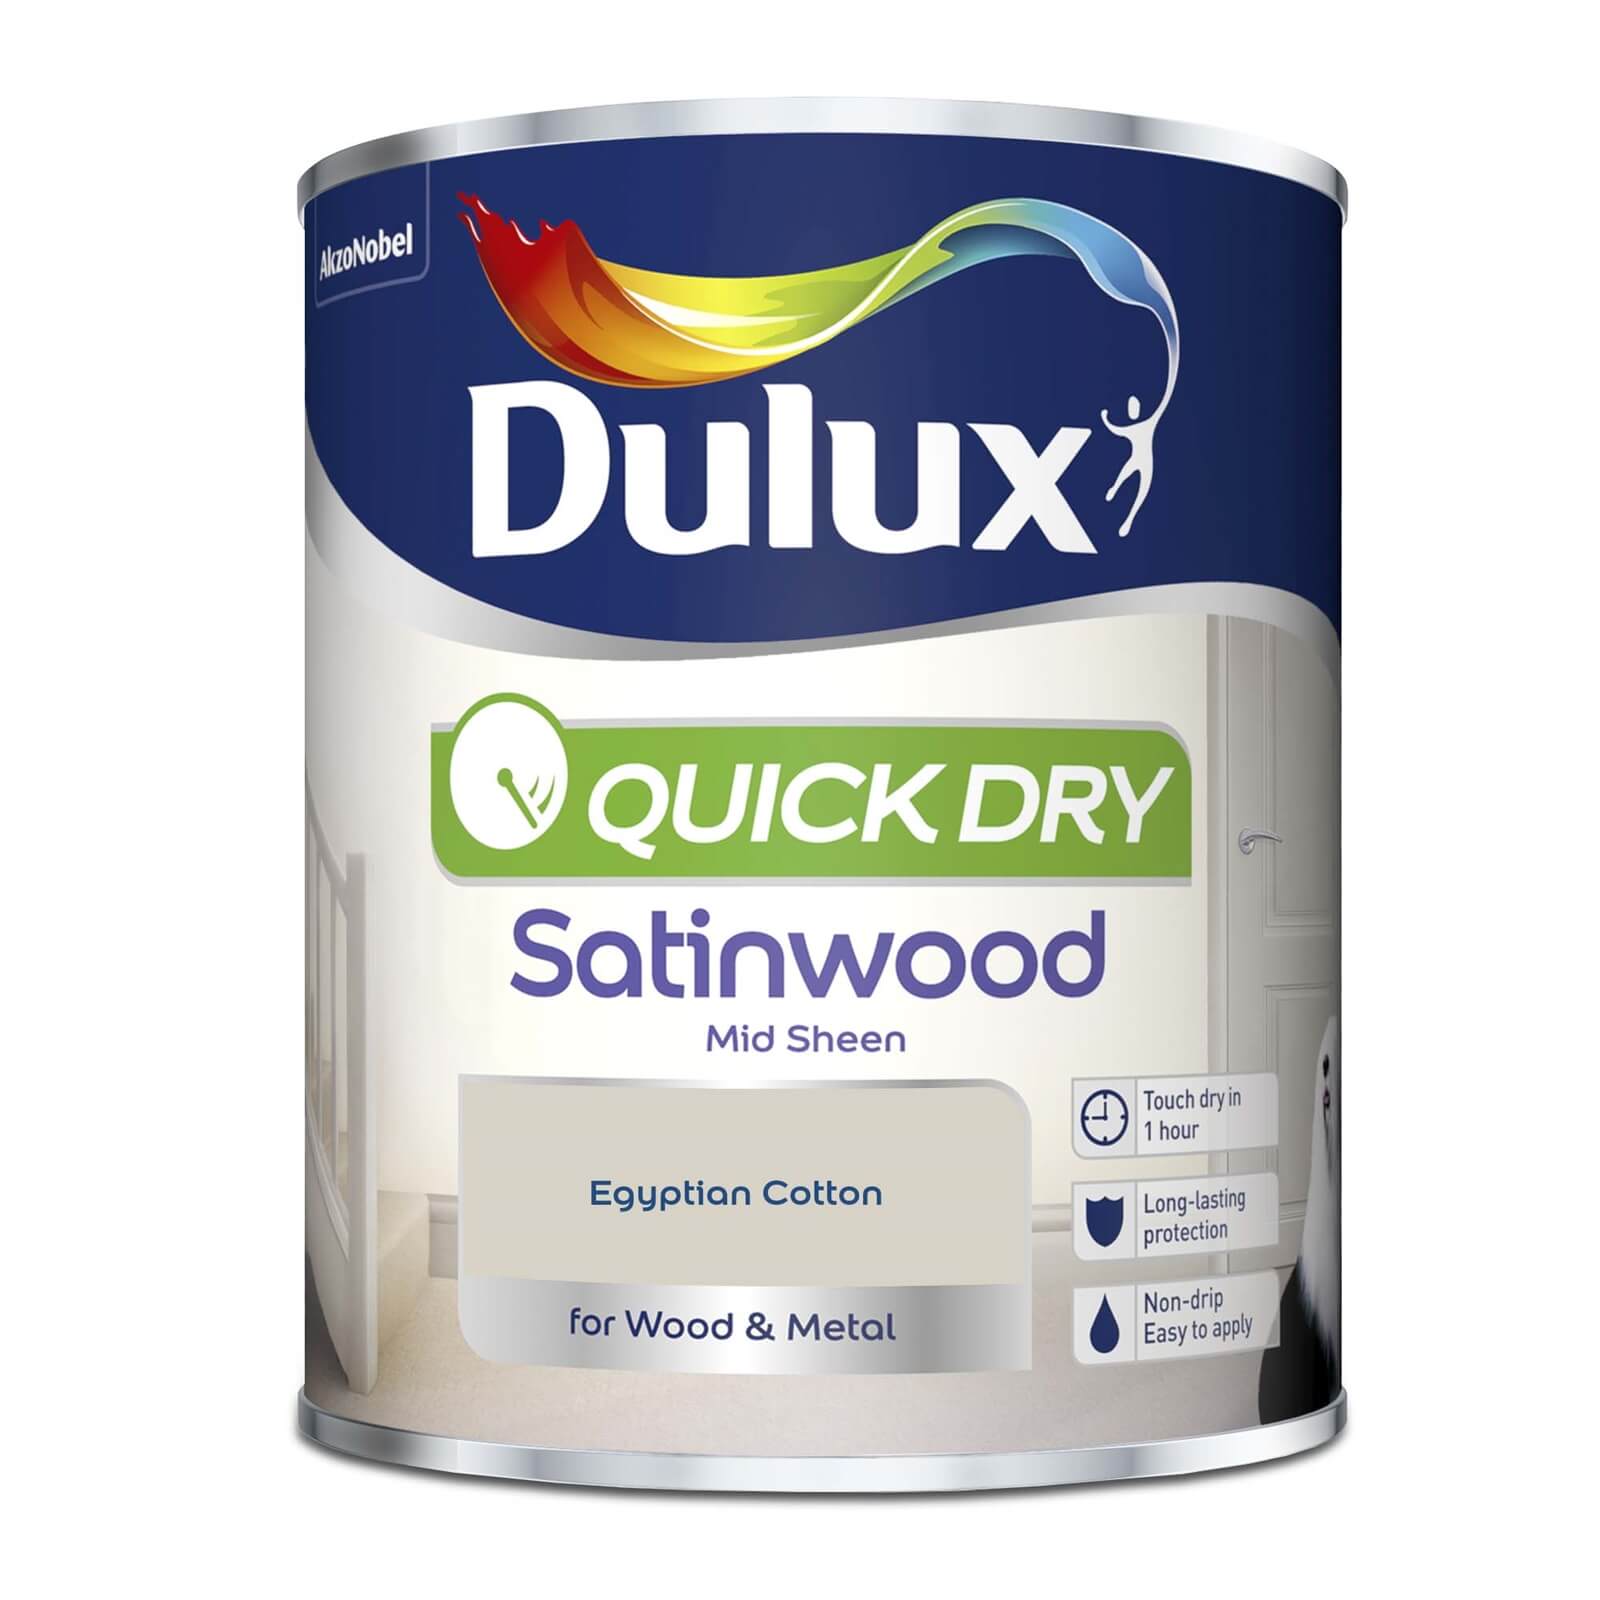 Dulux Quick Dry Satinwood Egyptian Cotton - 750ml